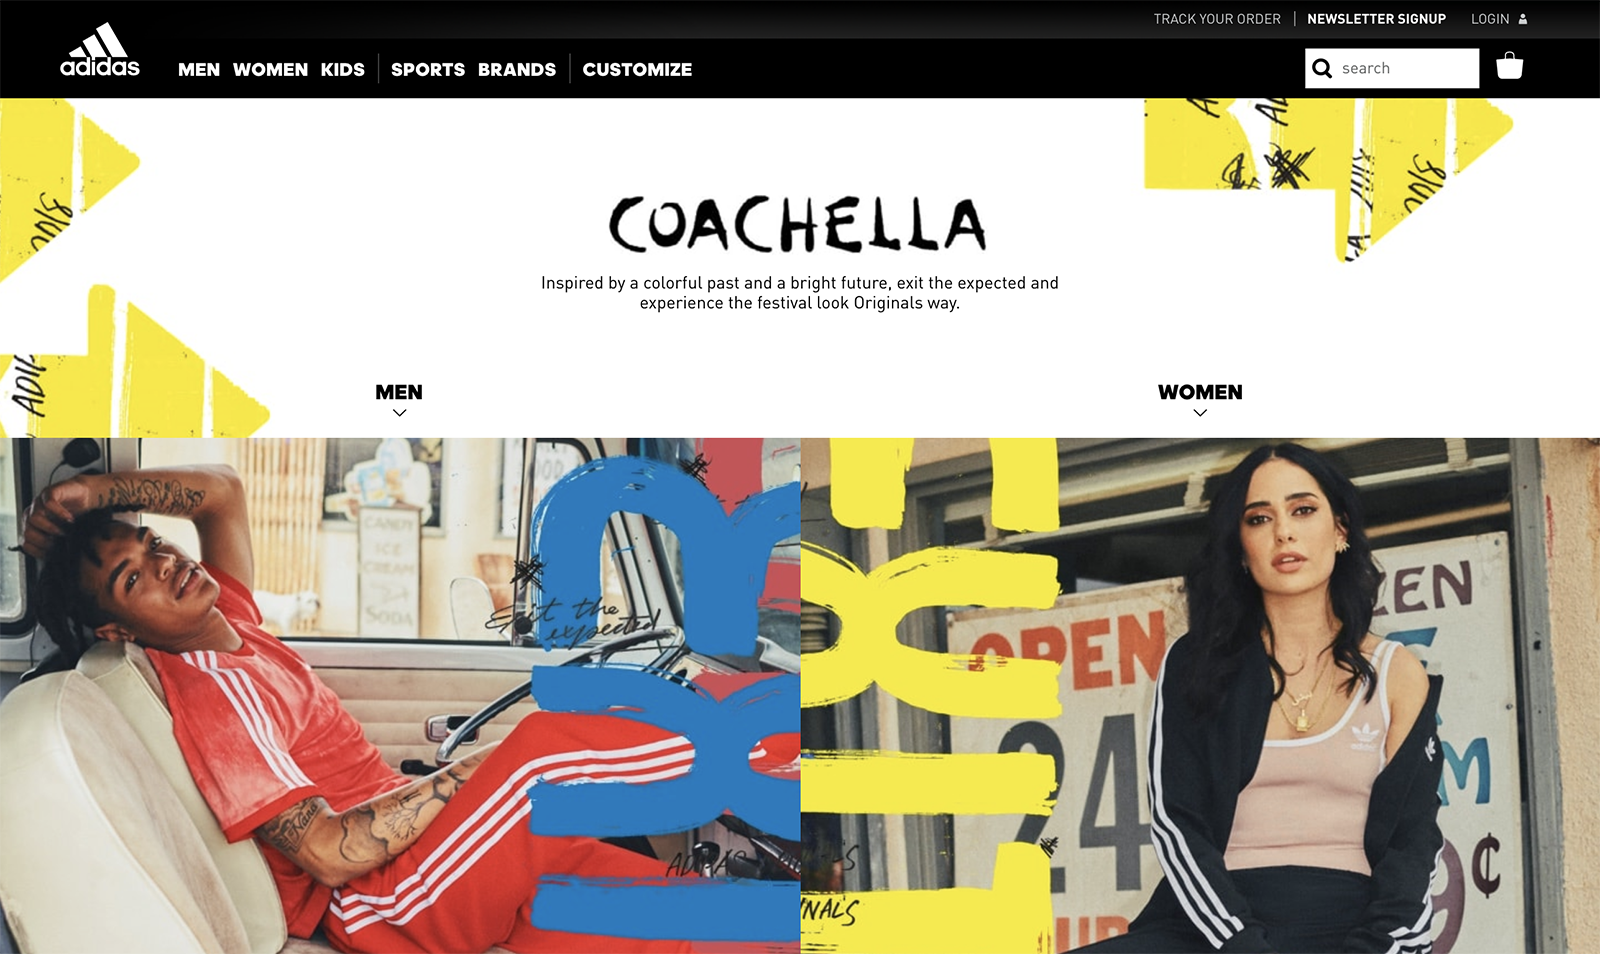 The adidas webpage with the Coachella Exit the Expected campaign graphics. Yellow and blue handwritten EXIT graphics overlay photoshoot images of a guy lounging in the VW bus, and a woman standing in front of the desert gas station.